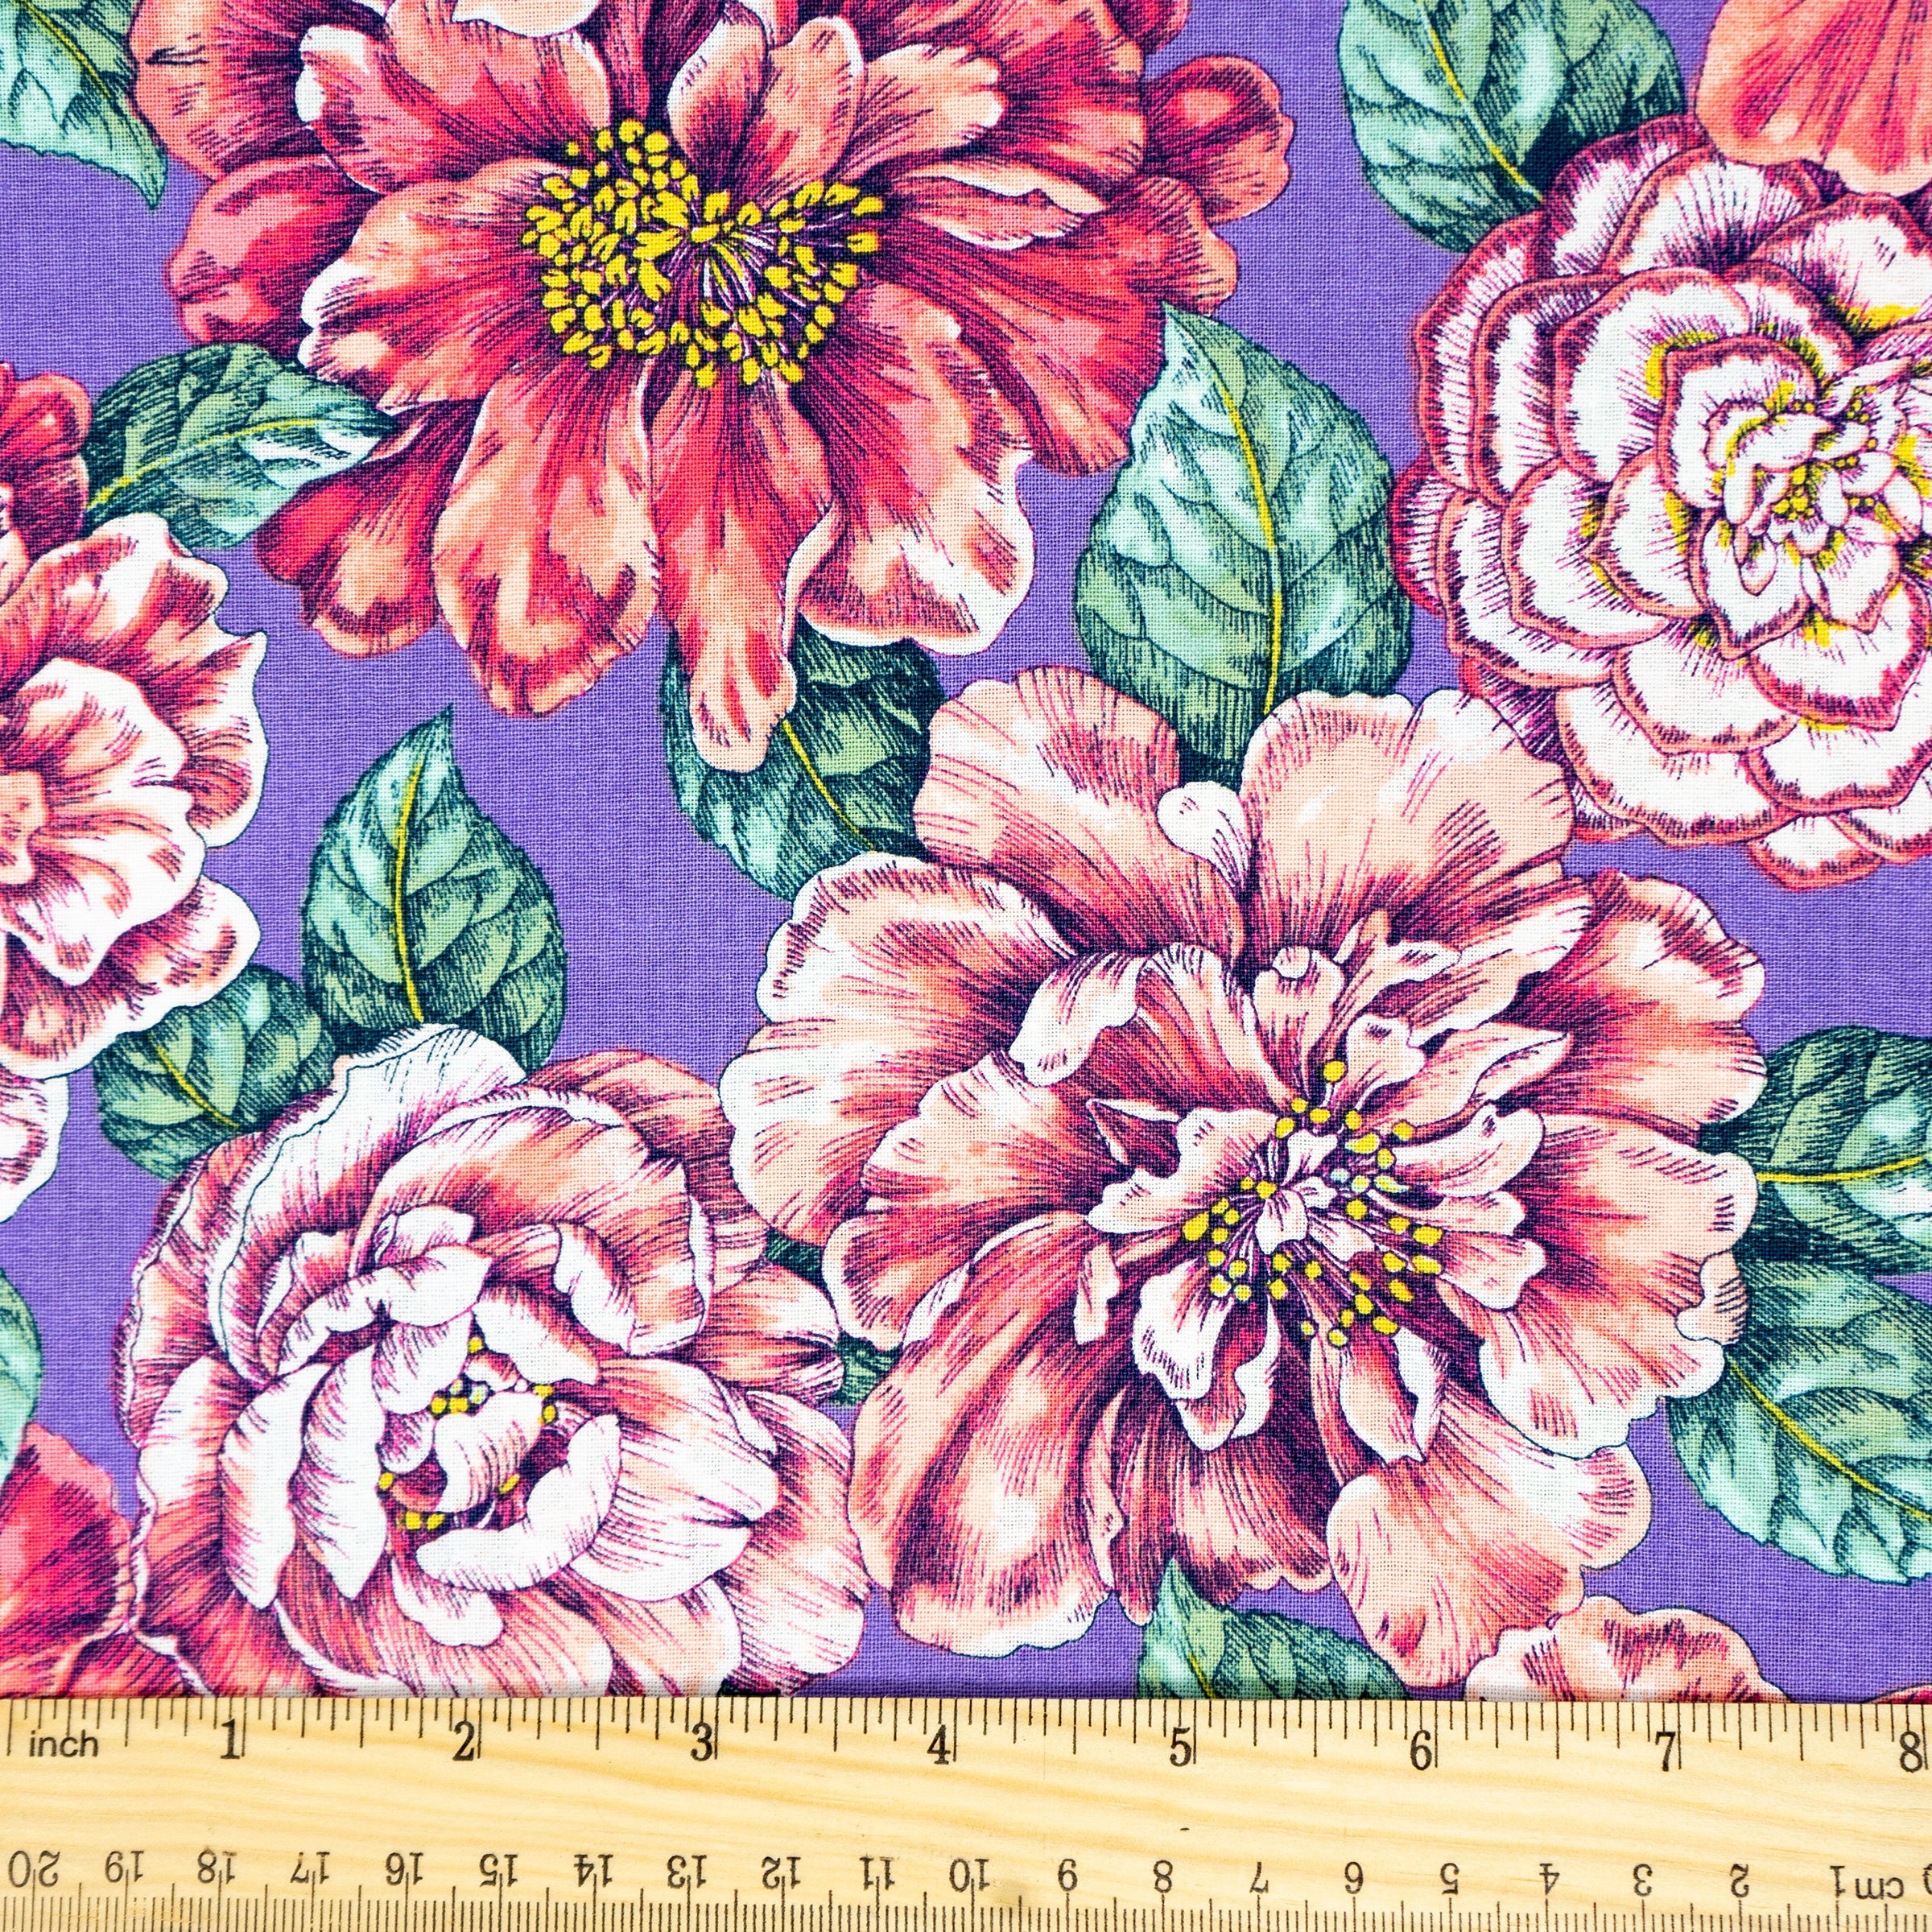 Waverly Inspirations 44" 100% Cotton Bridget Floral Sewing & Craft Fabric By the Yard, Wisteria and Coral